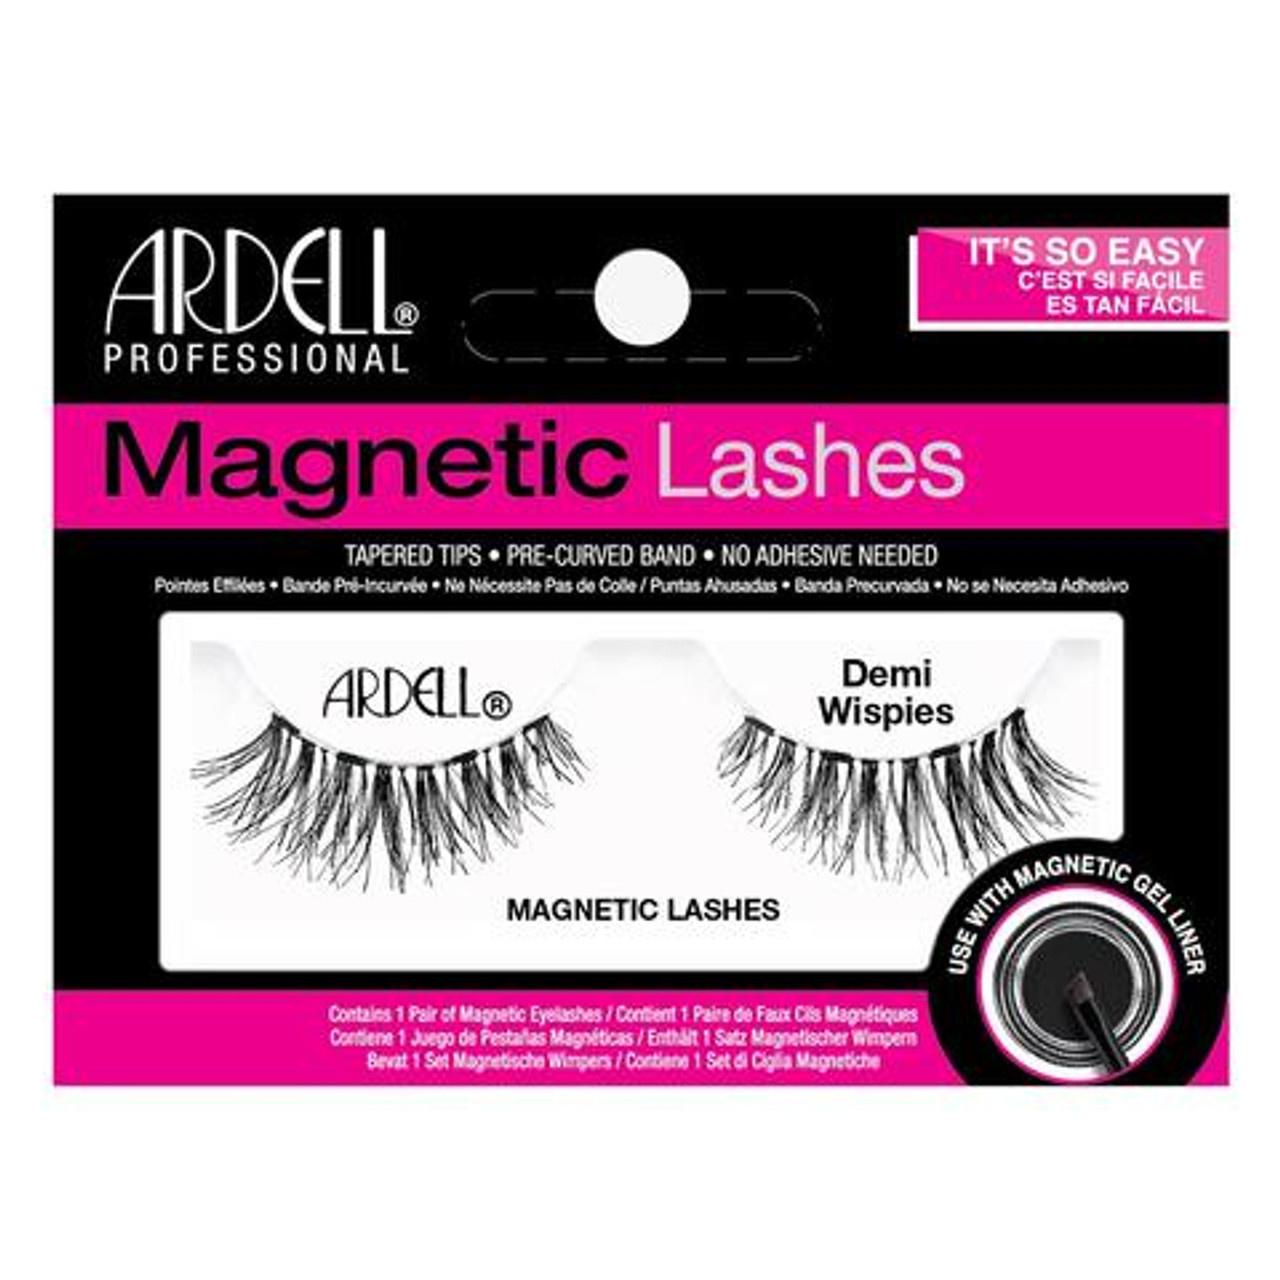 Ardell Magnetic Single Lash - Demi Wispies at Lady Moss